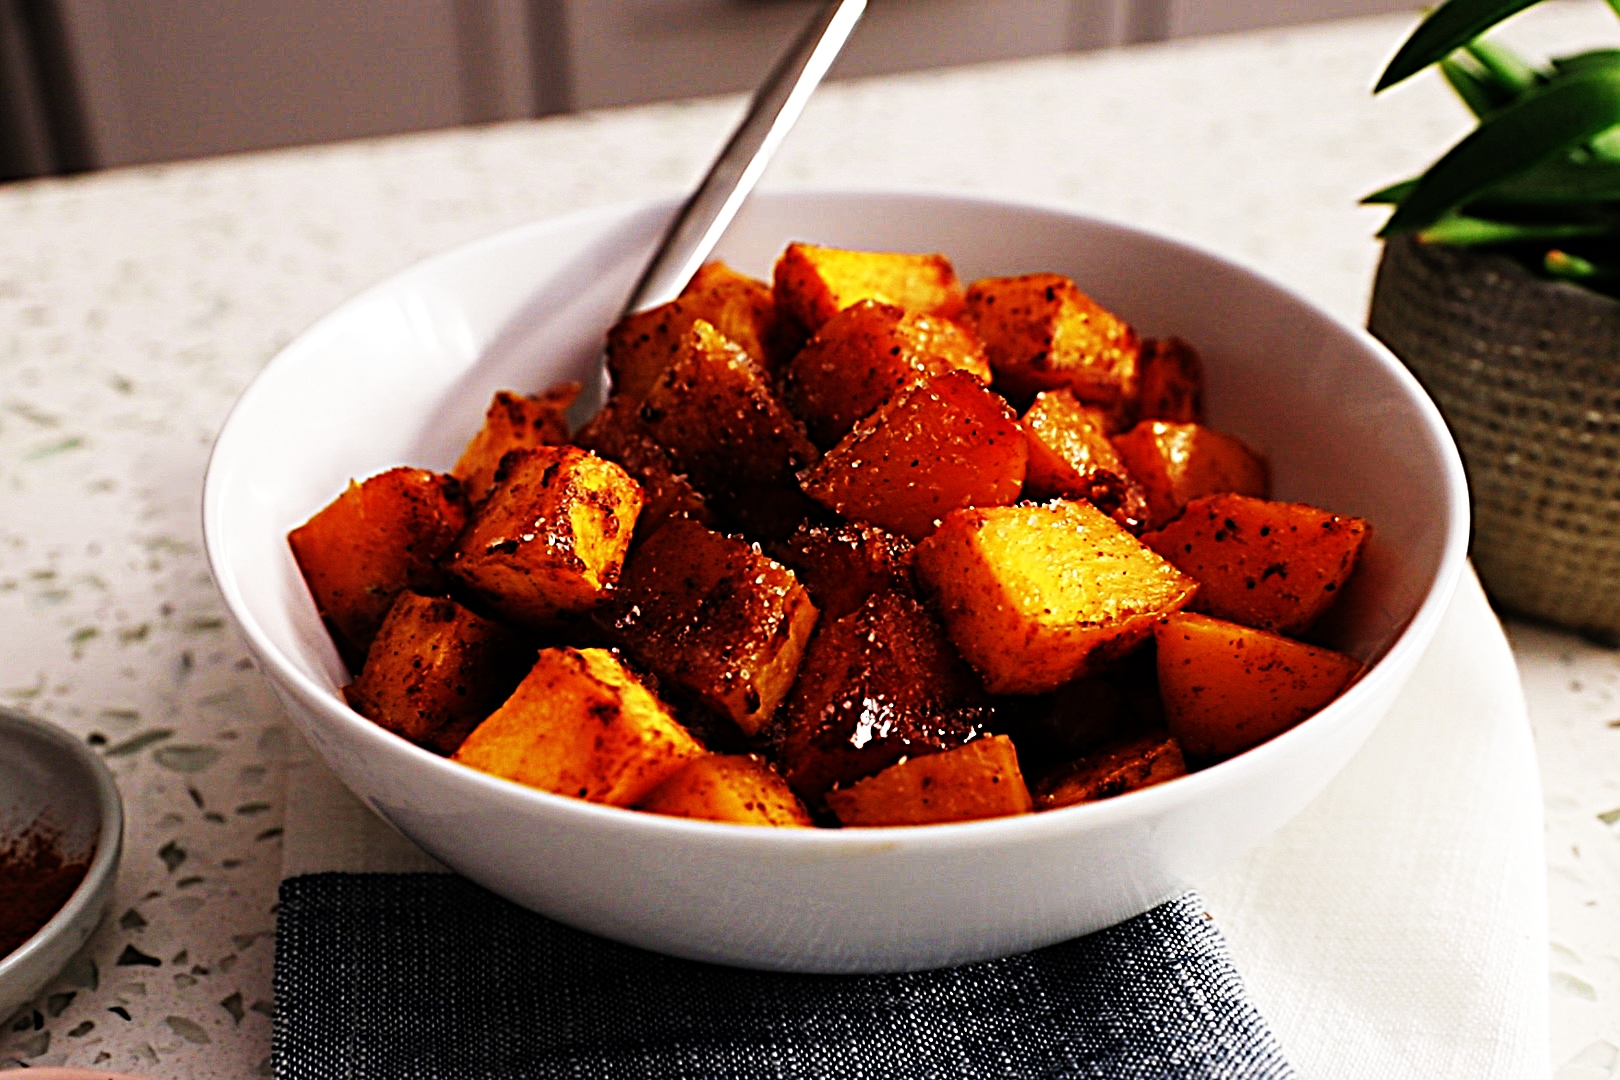 Stupid-Easy Recipe for Brown Sugar And Spice Roasted Butternut Squash (#1 Top-Rated)